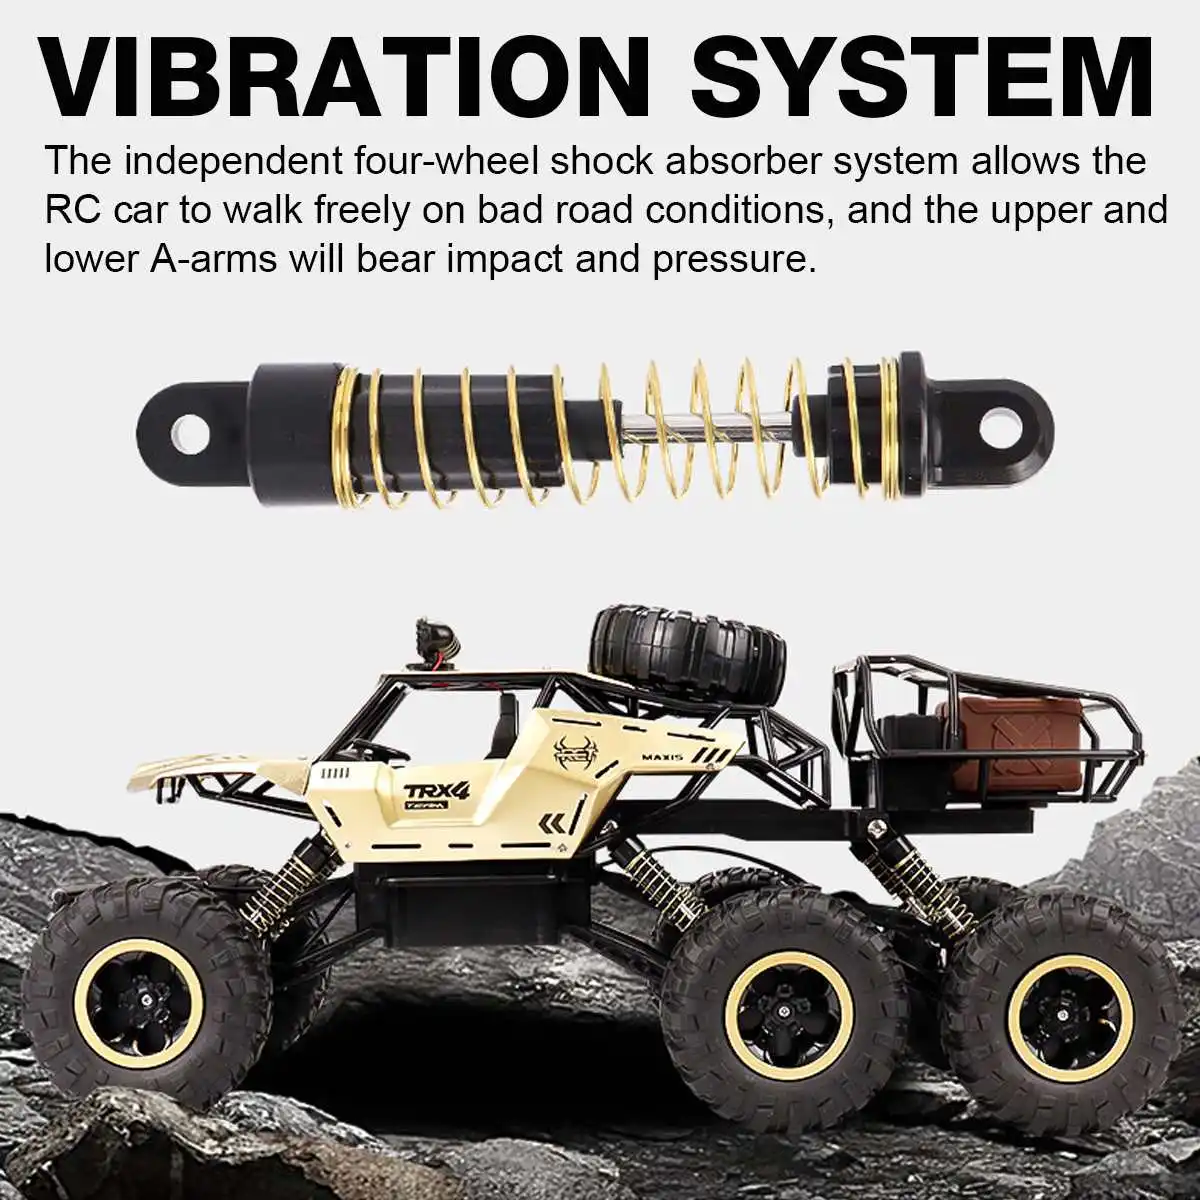 1/12 4WD 6 Wheels Remote Control Car 50km/h High Speed RC Car Electric Monster Truck Vehicle Models Toys for Children enlarge